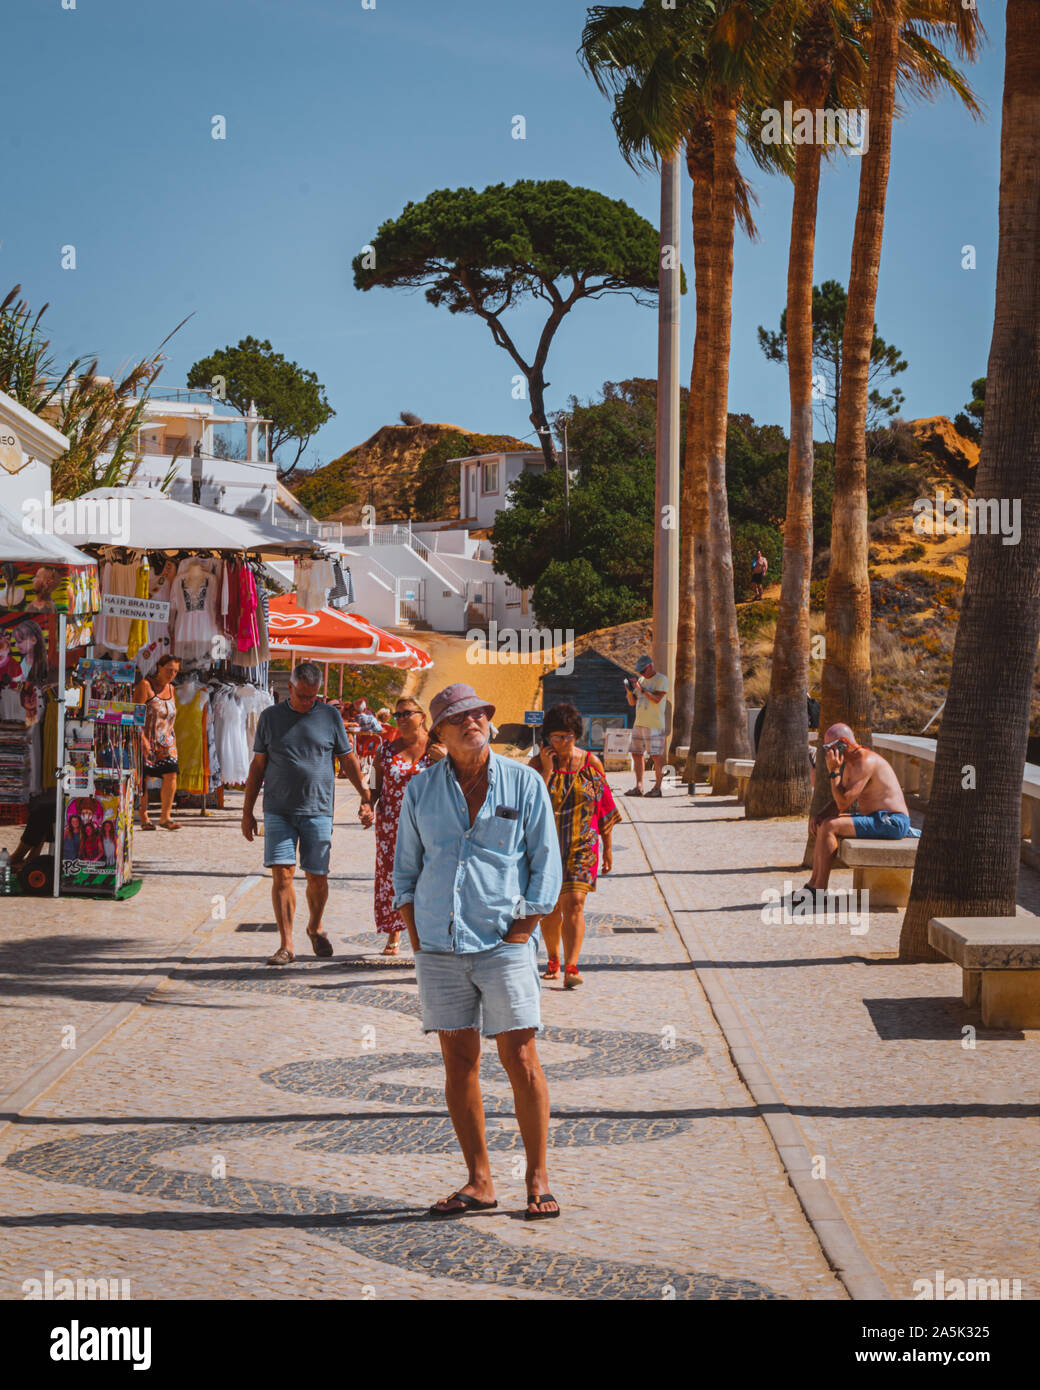 Olhos D'Agua, Portugal - October 3 2019: The promenade of Olhos D'Agua starting to get busy on a warm late summer morning Stock Photo